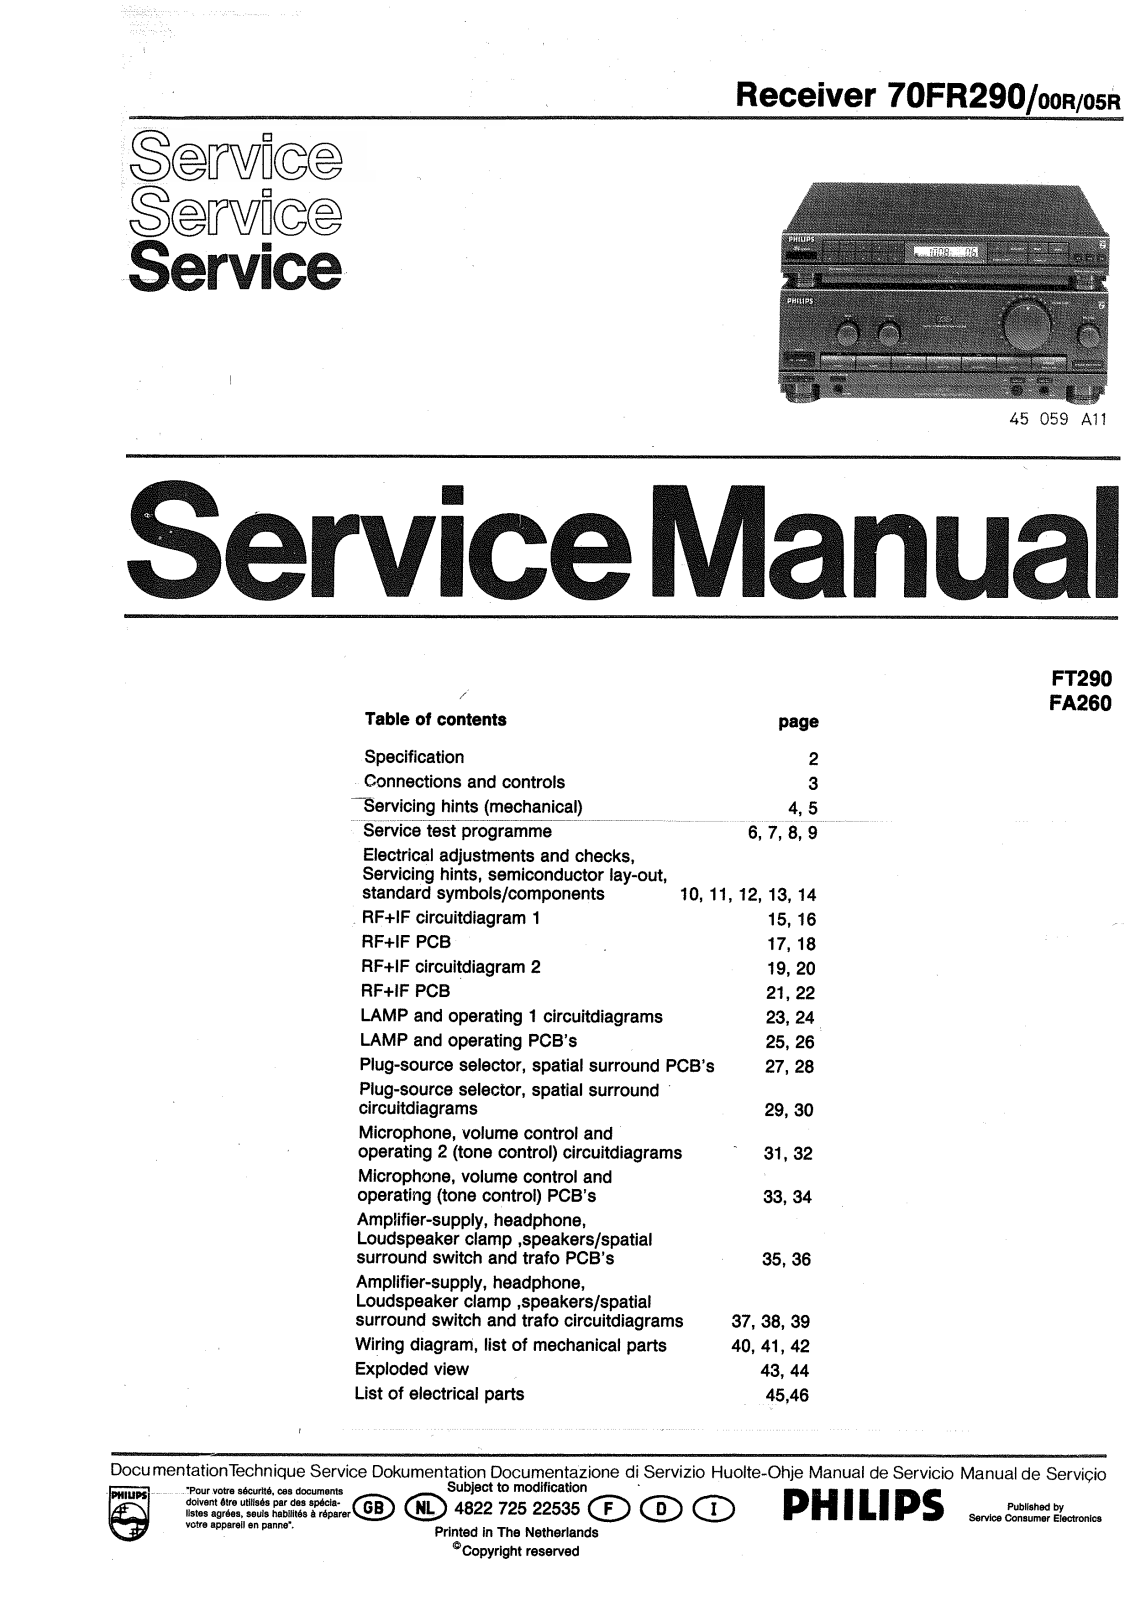 Philips 70-FR-290 Service Manual